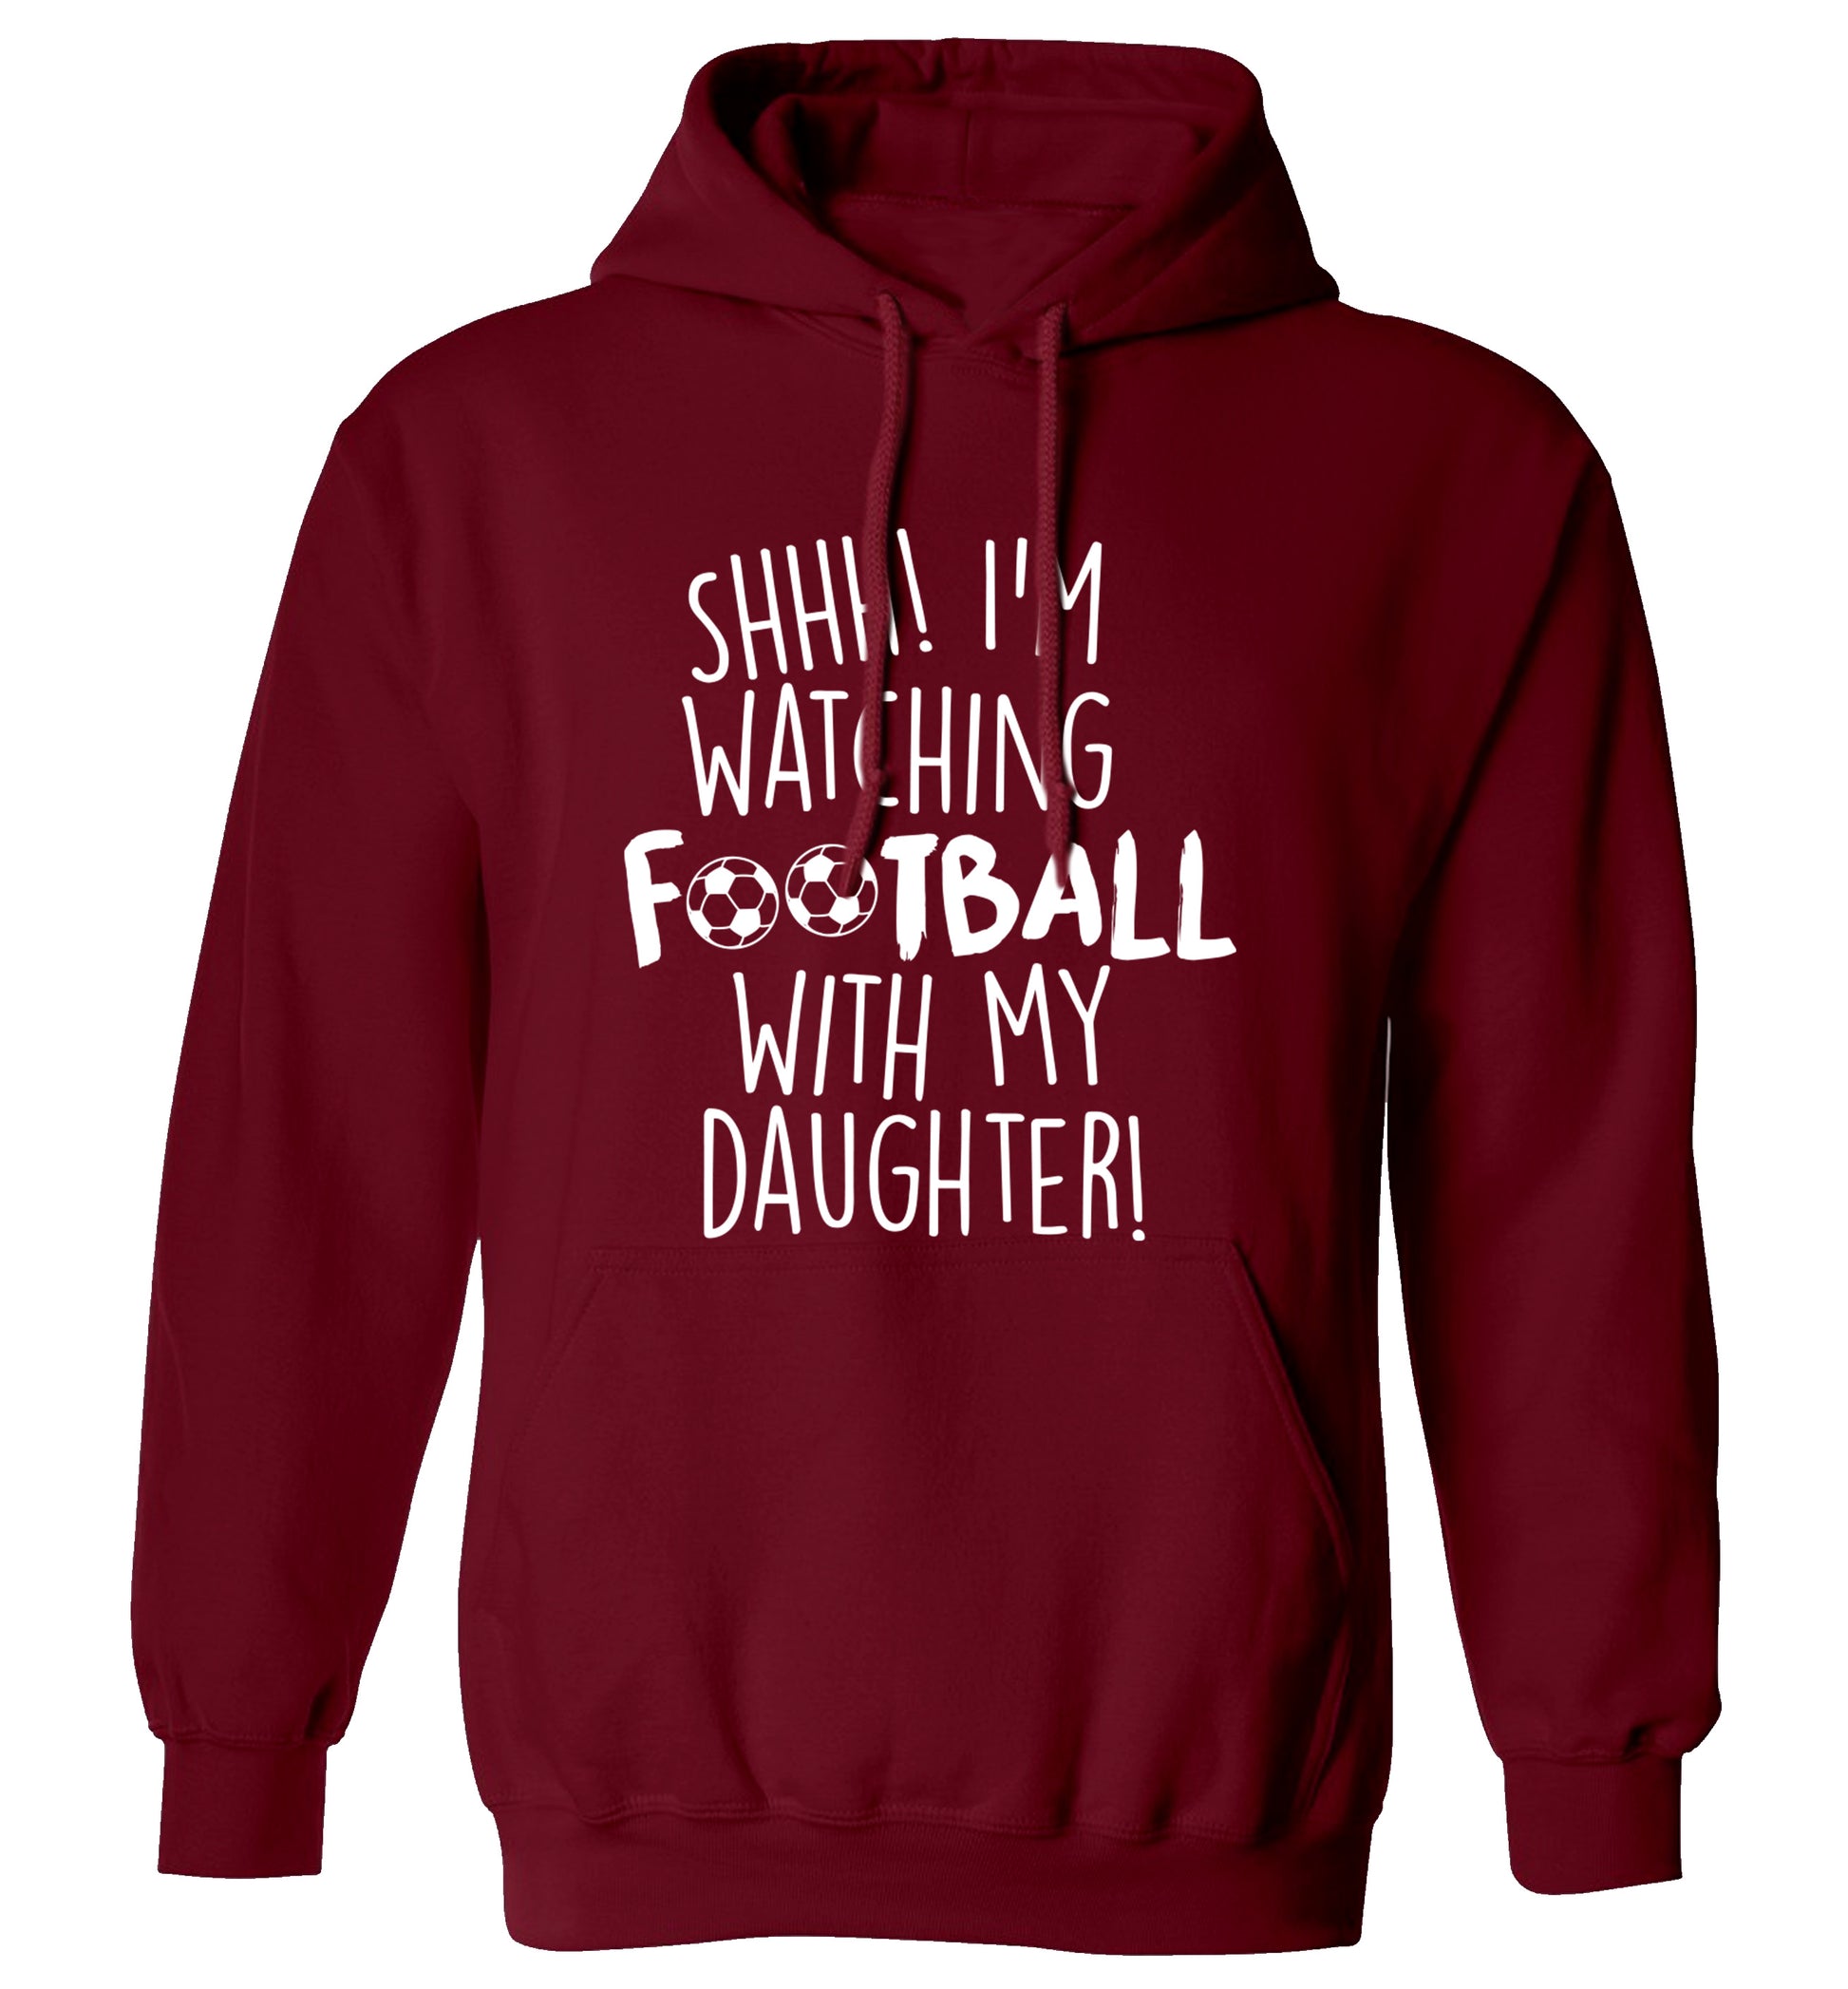 Shhh I'm watching football with my daughter adults unisexmaroon hoodie 2XL